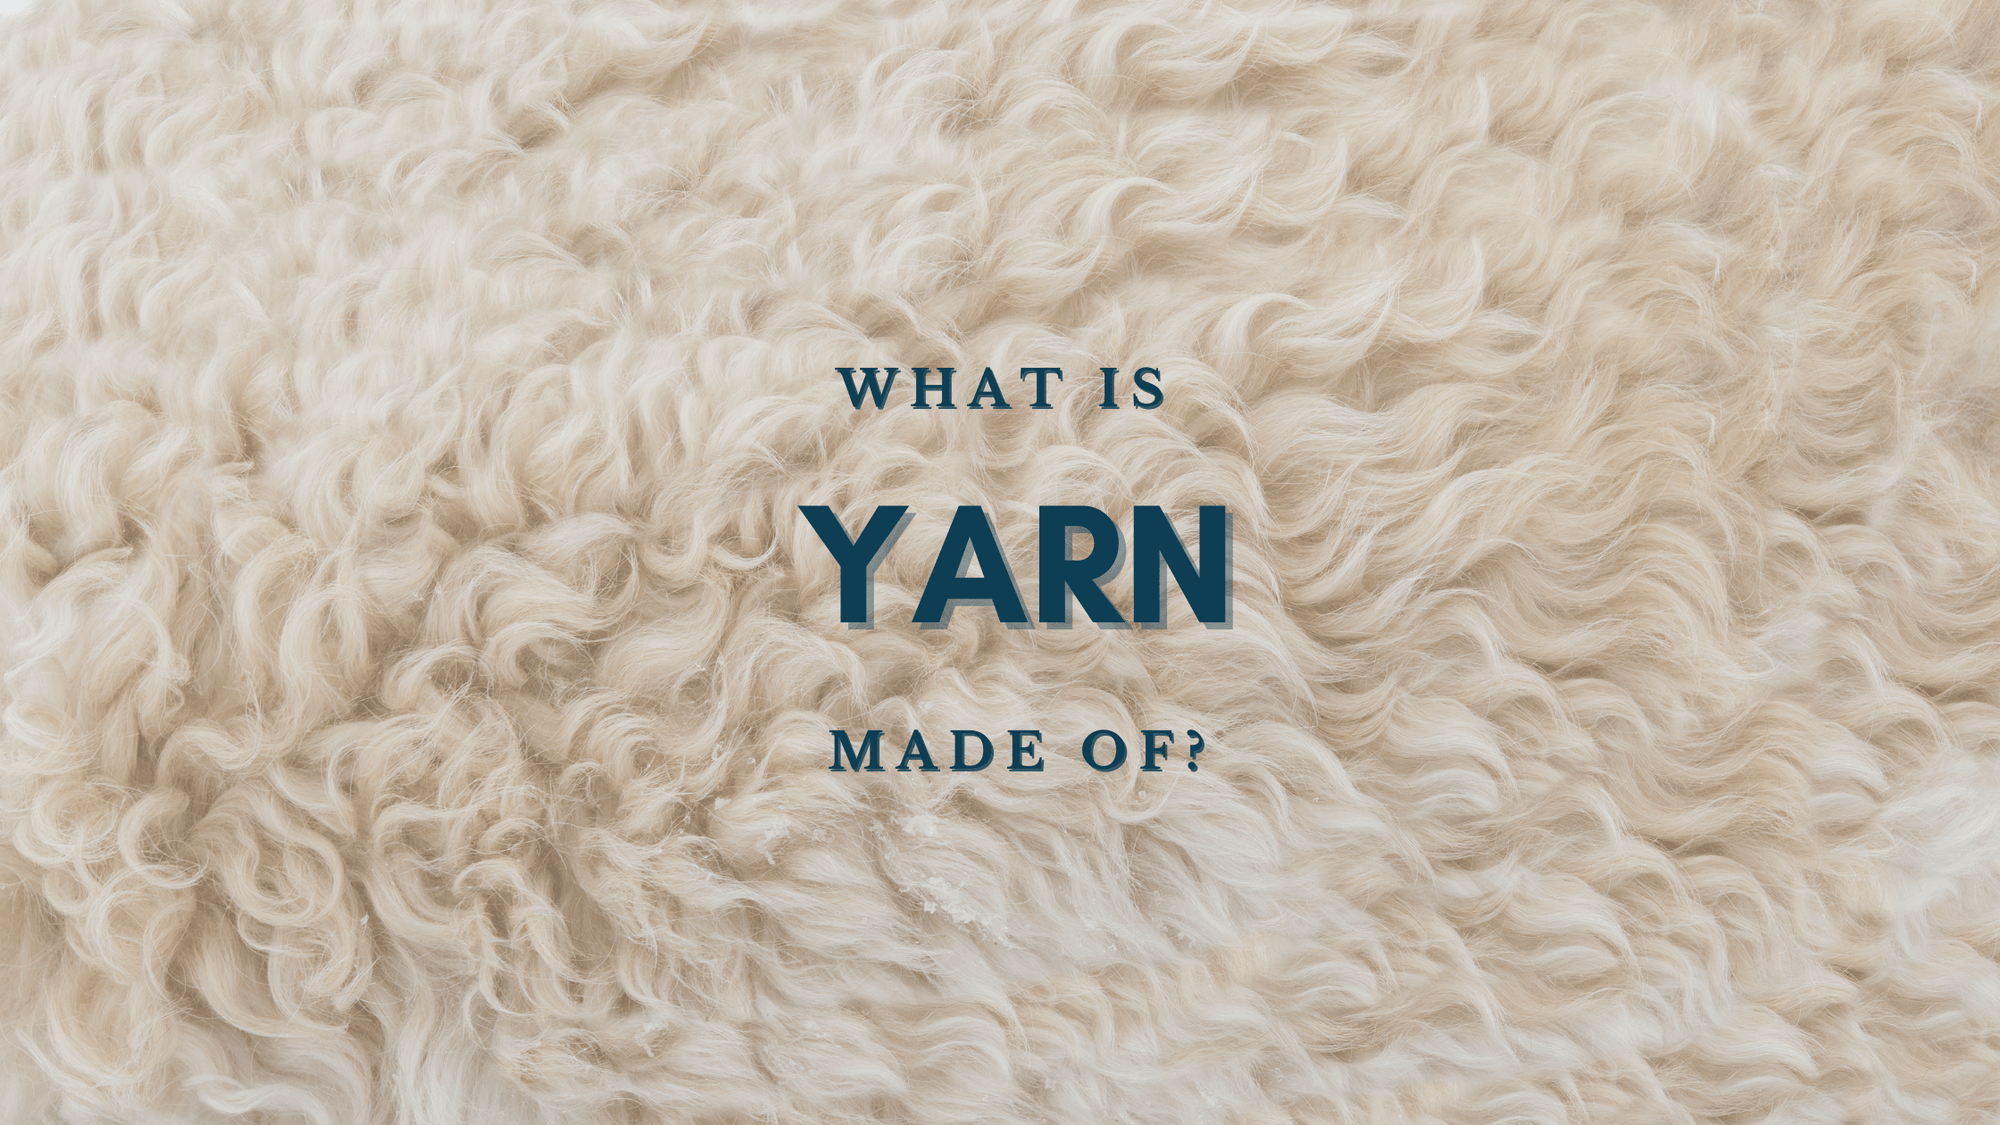 What is yarn made of?